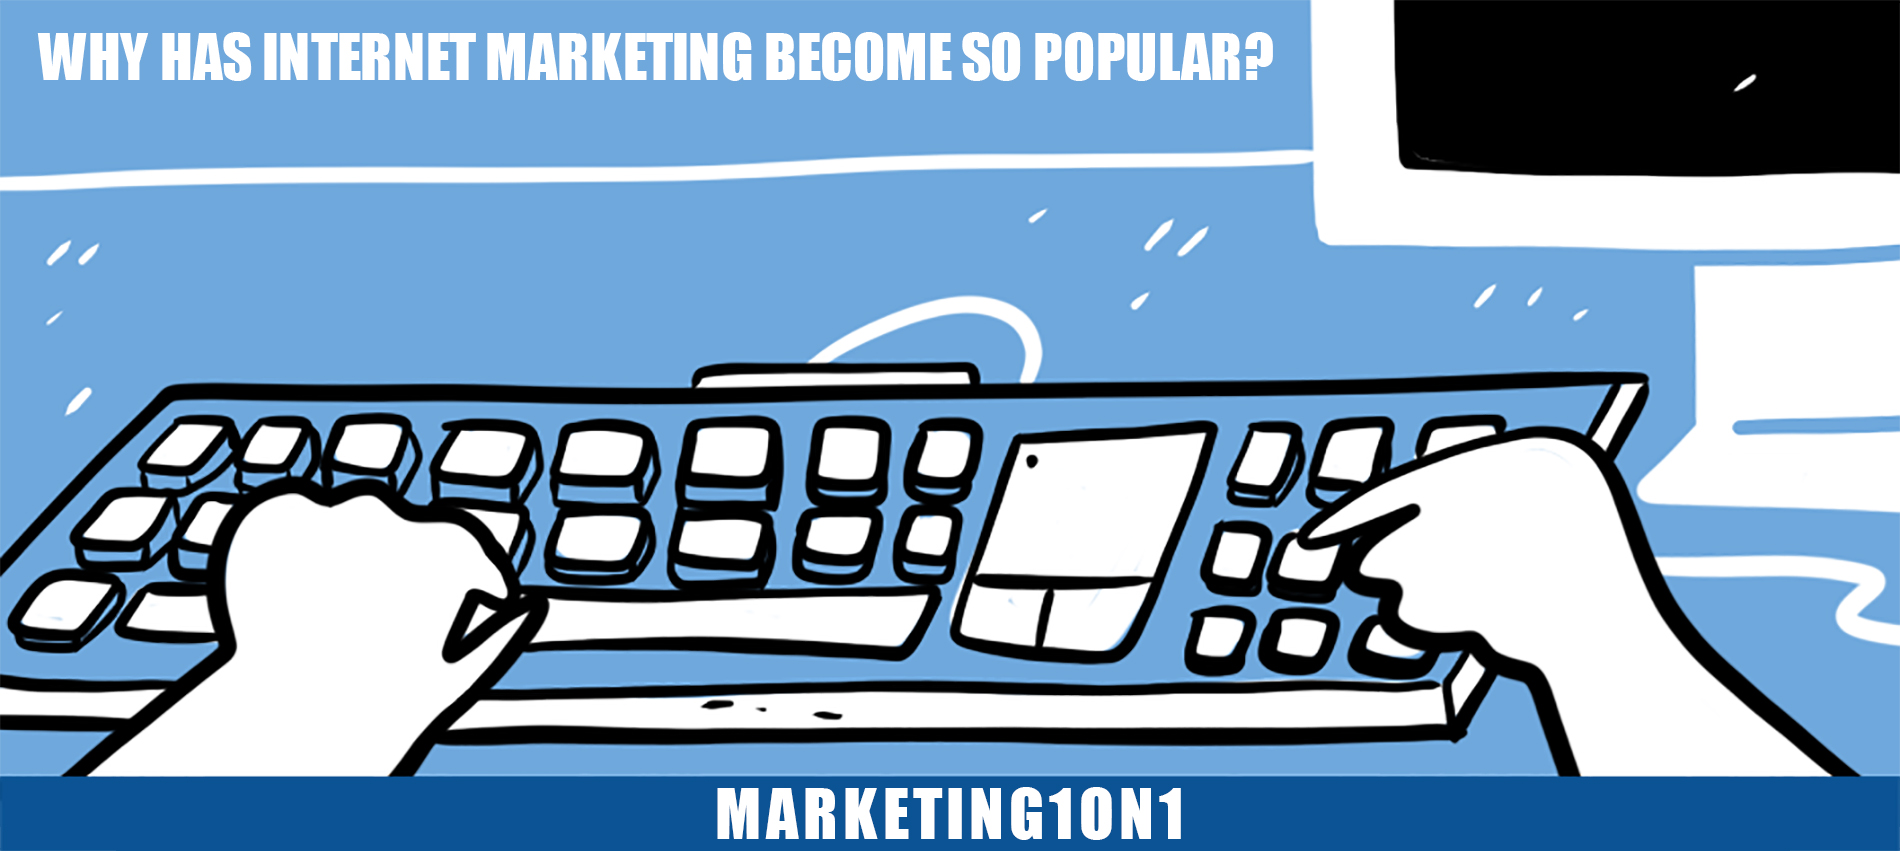 Why has internet marketing become so popular?